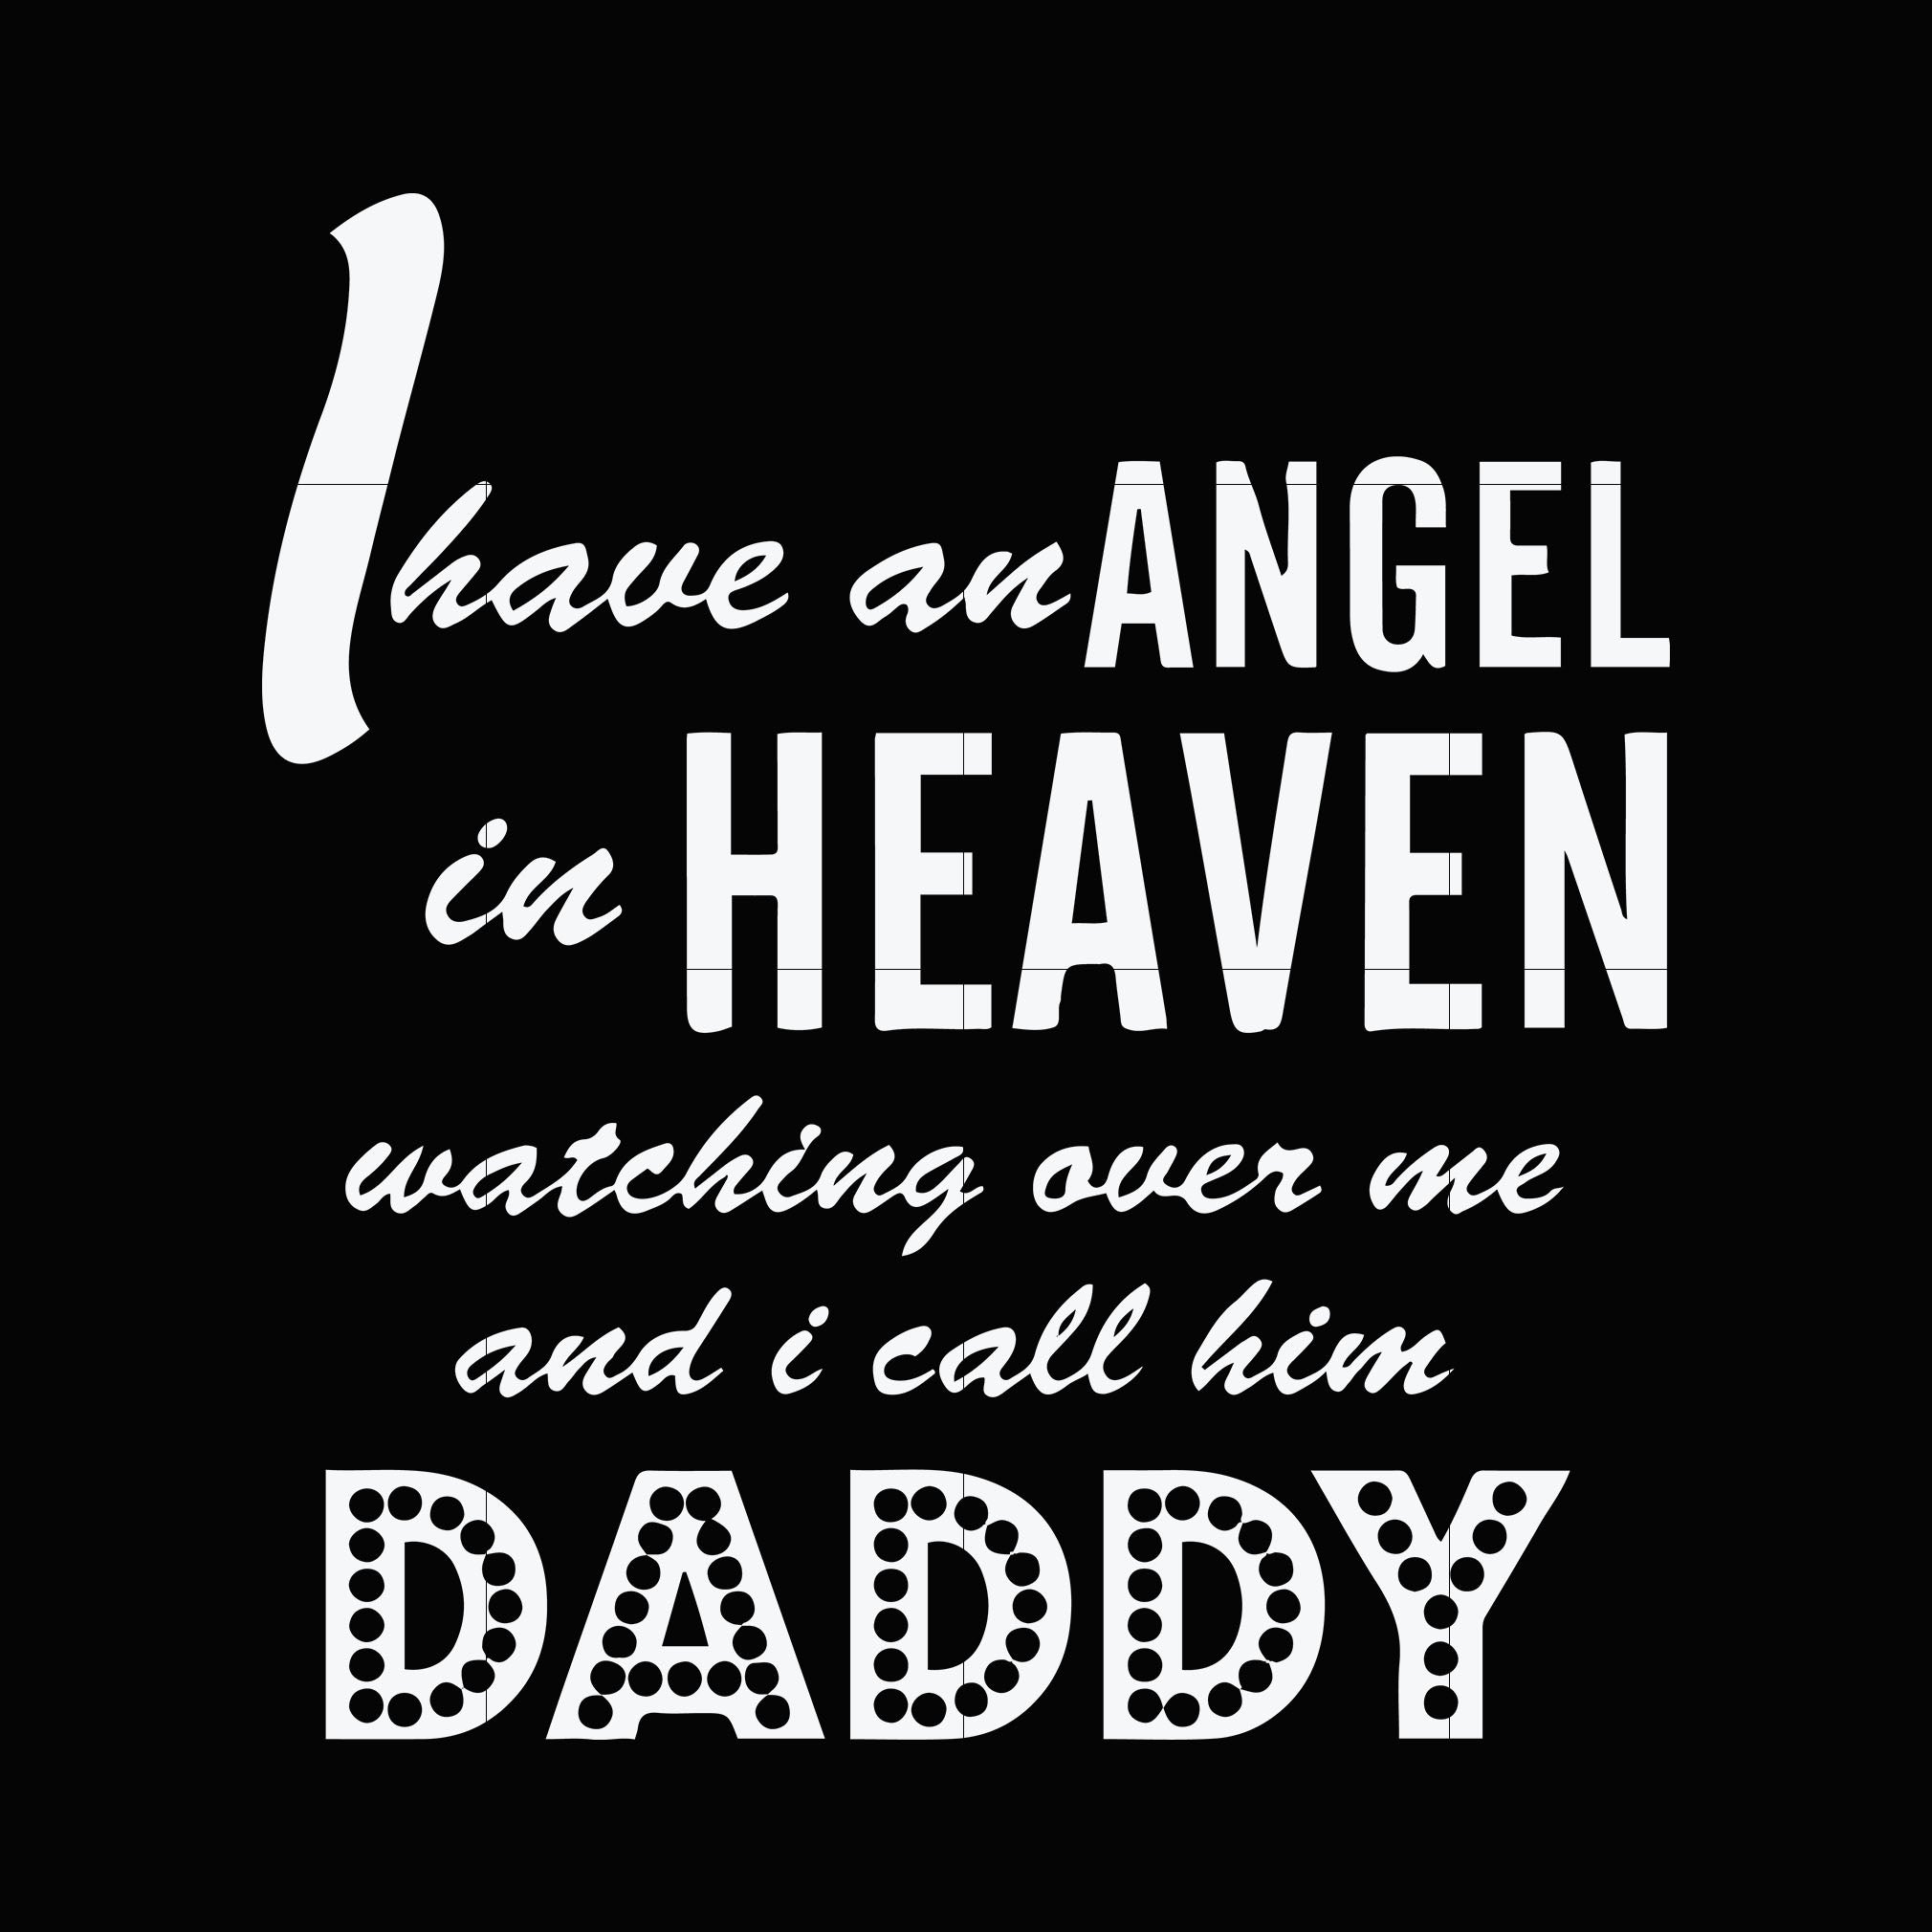 Download Dad In Heaven Svg I Have An Angel In Heaven And I Call Him Dad Svg File Png File Dxf File Eps File Pdf File Image Transfers Craft Supplies Tools Leadcampus Org